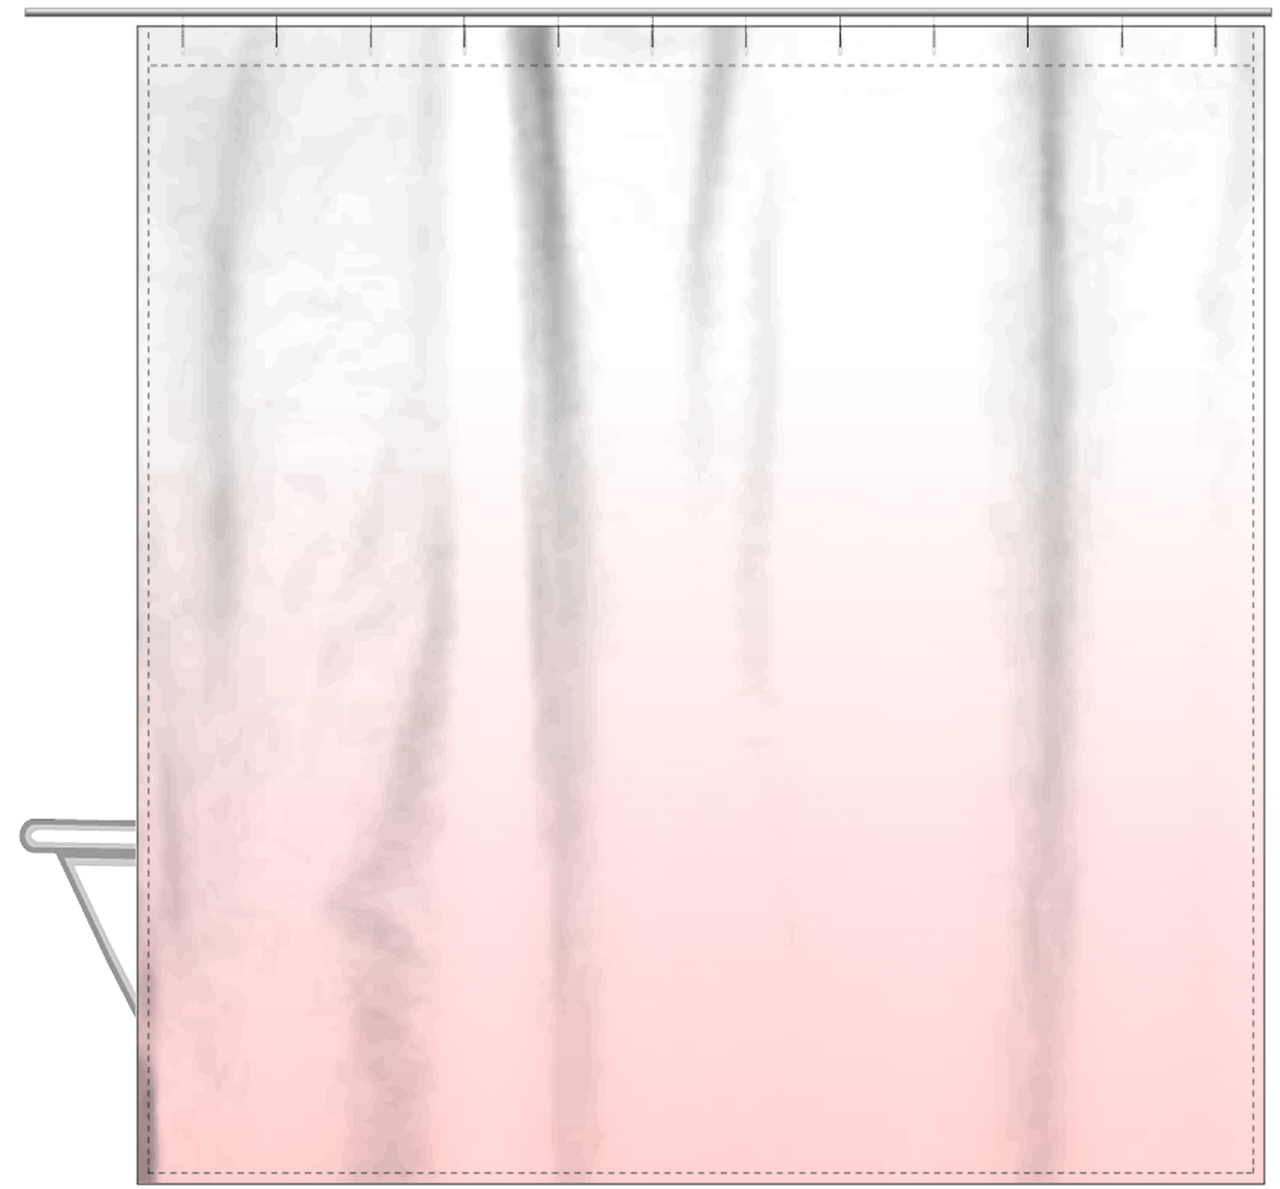 Personalized Ombre Shower Curtain - Pink and White - No Default Text - Ombre II - Hanging View